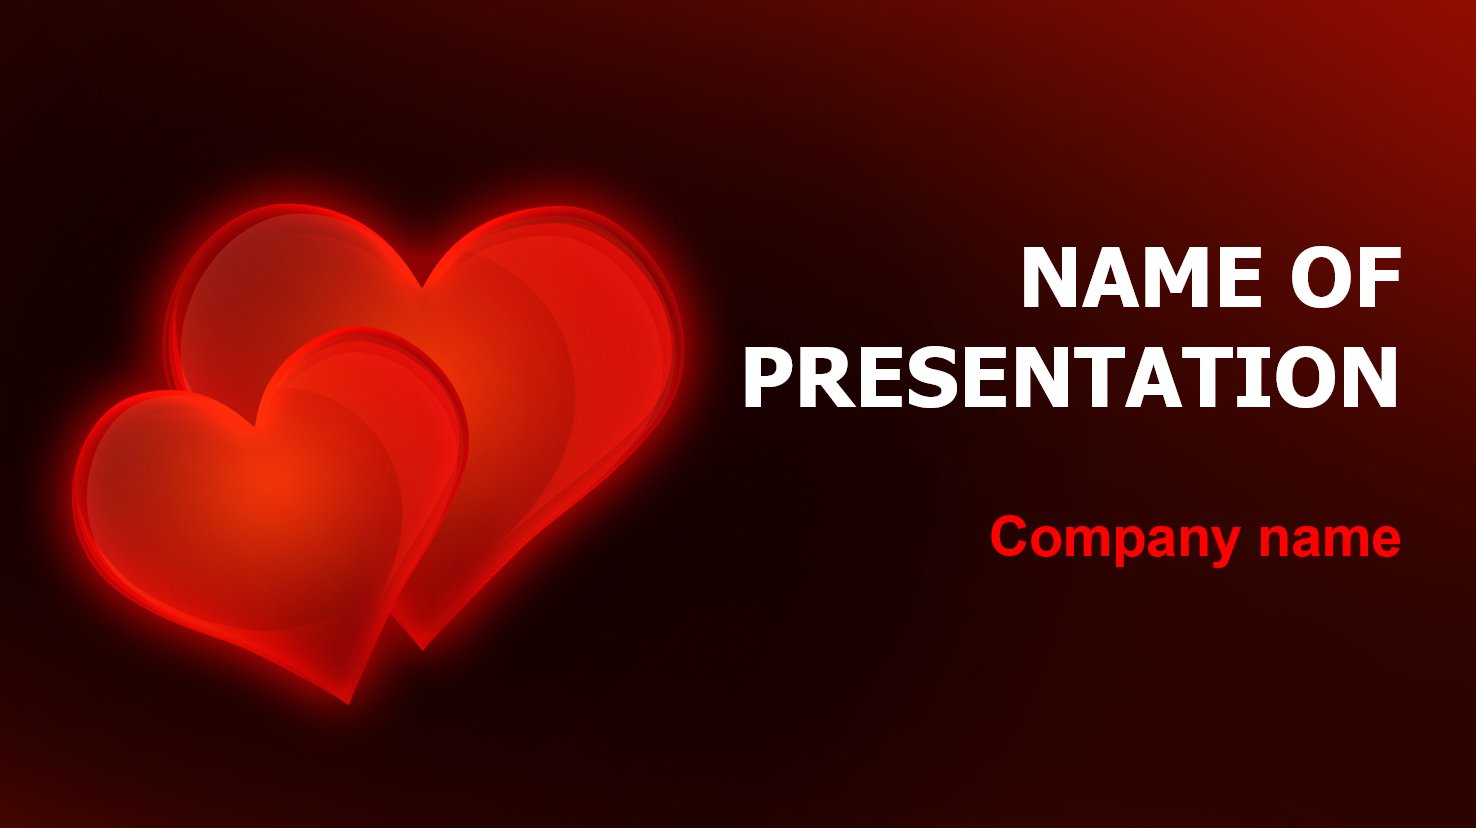 love theme for powerpoint presentation